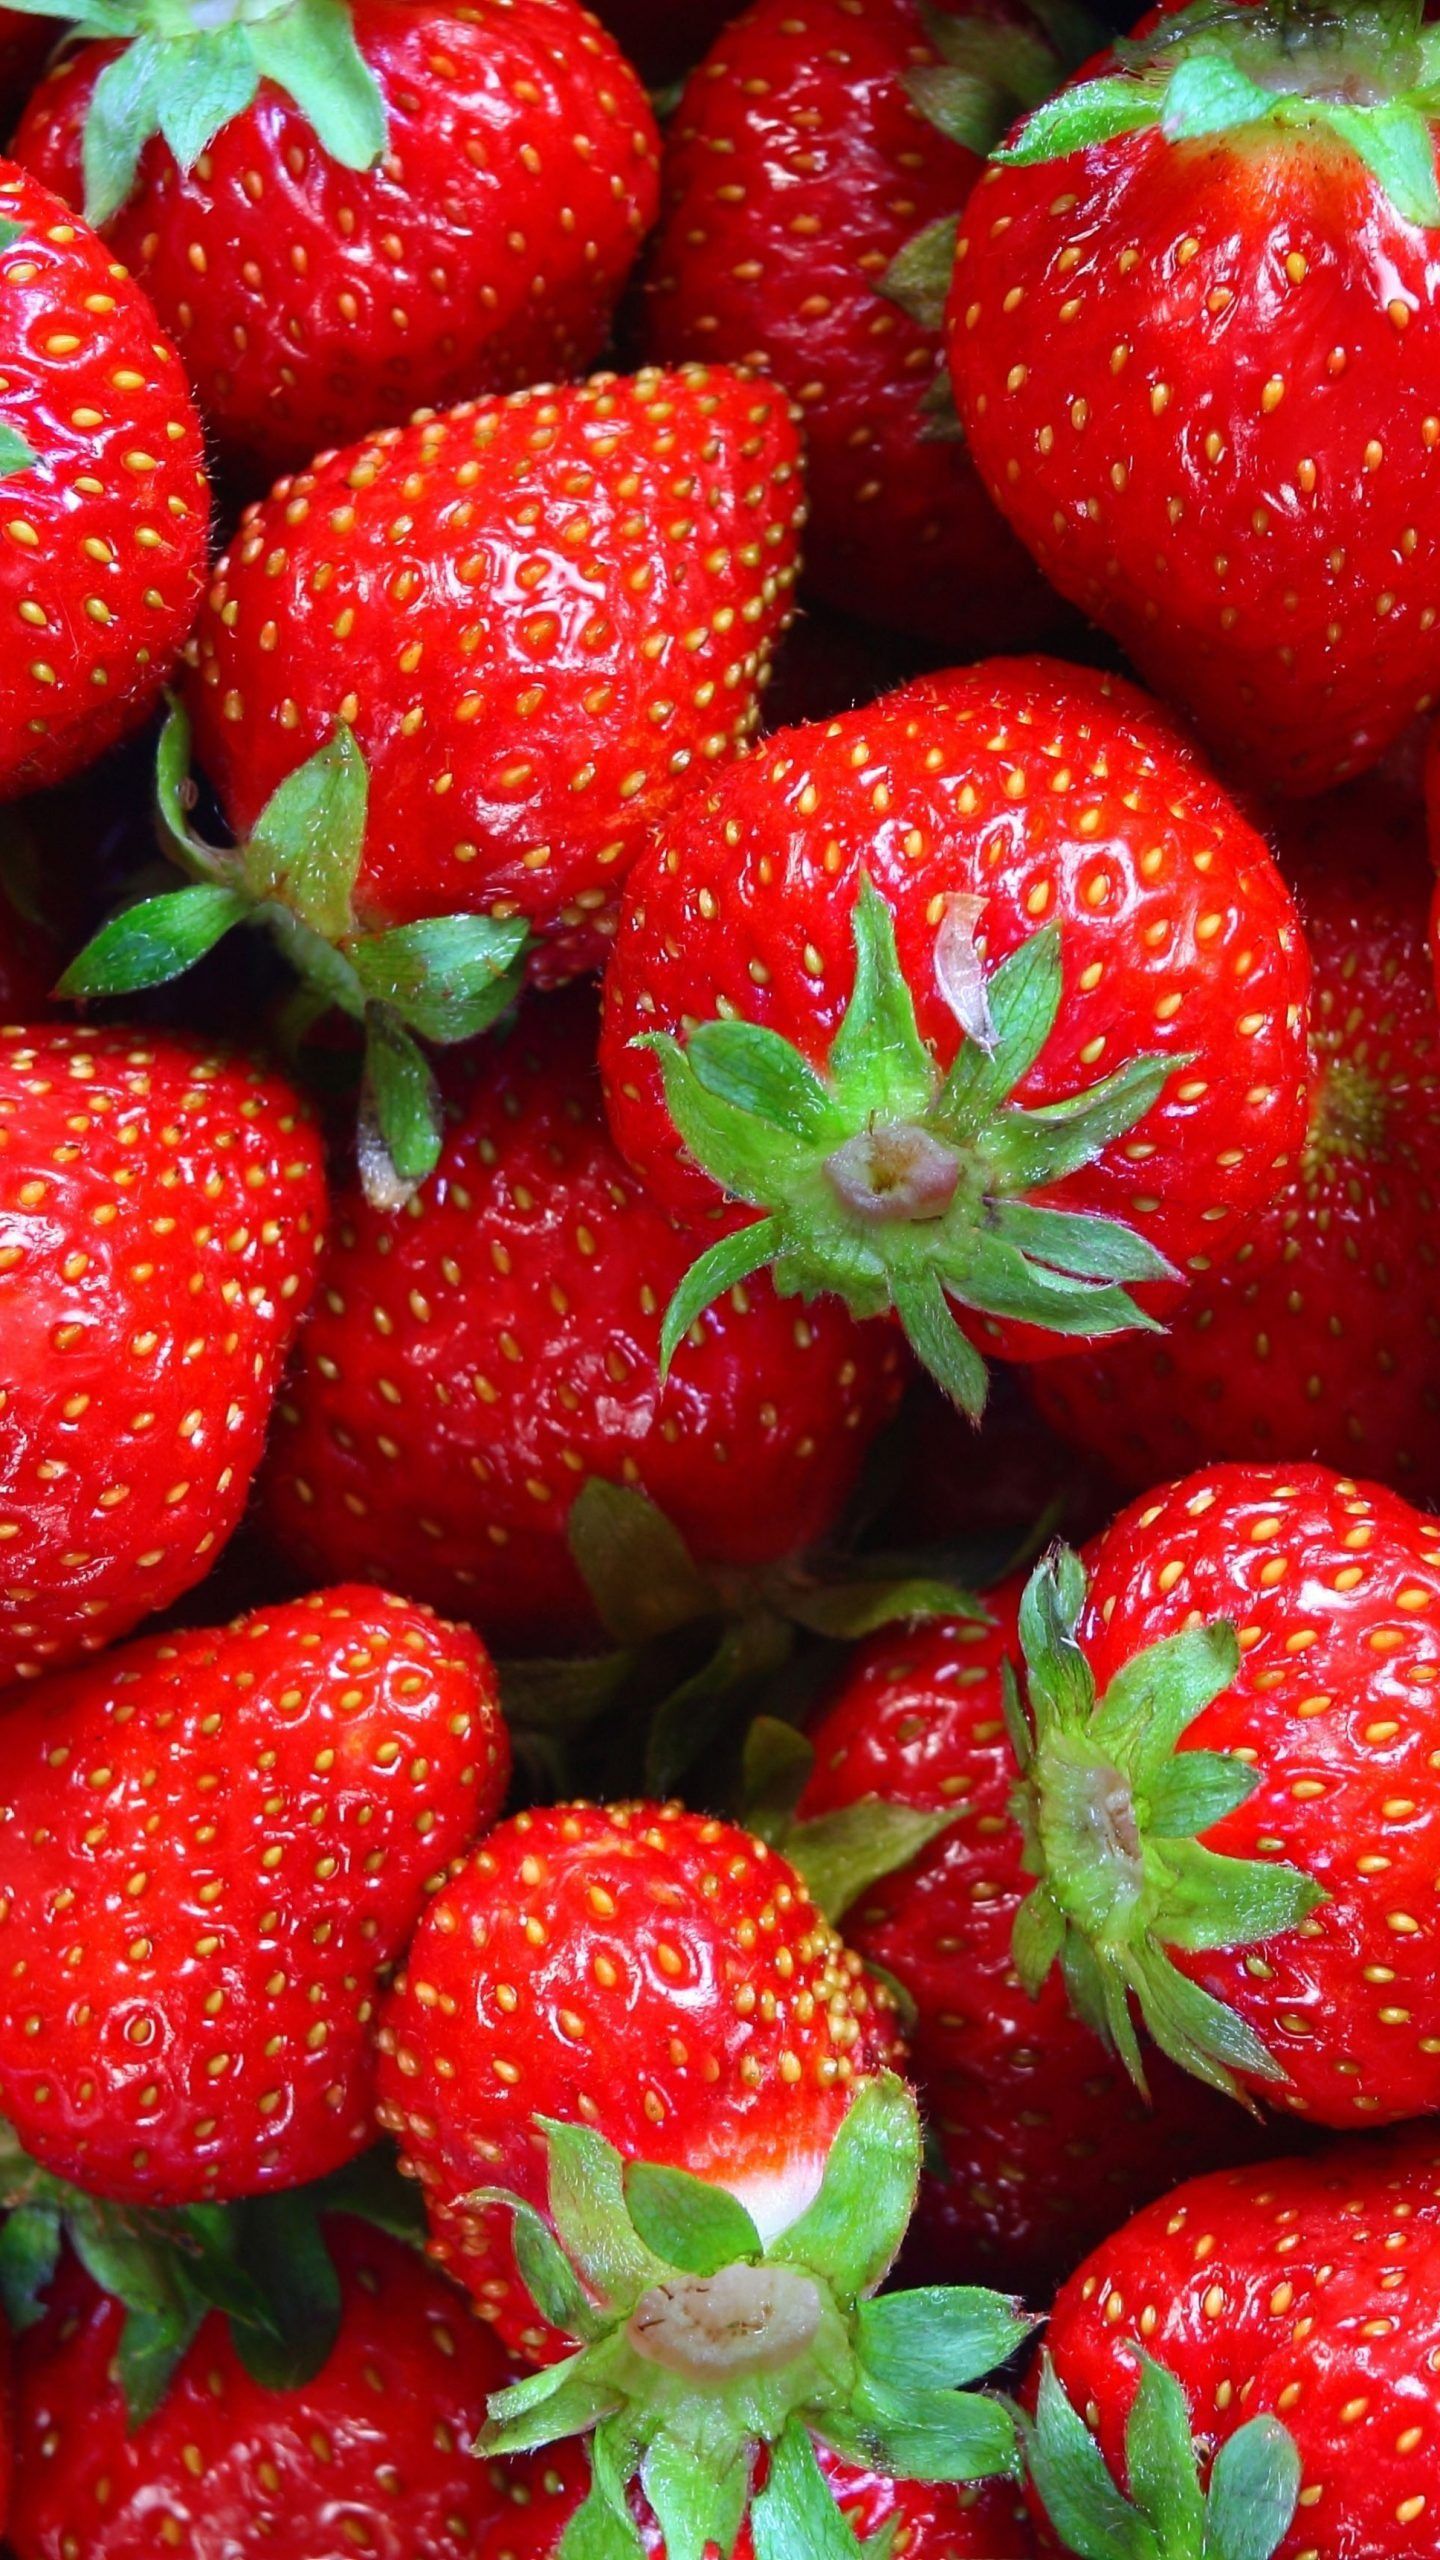 Strawberry aesthetic Wallpaper Download